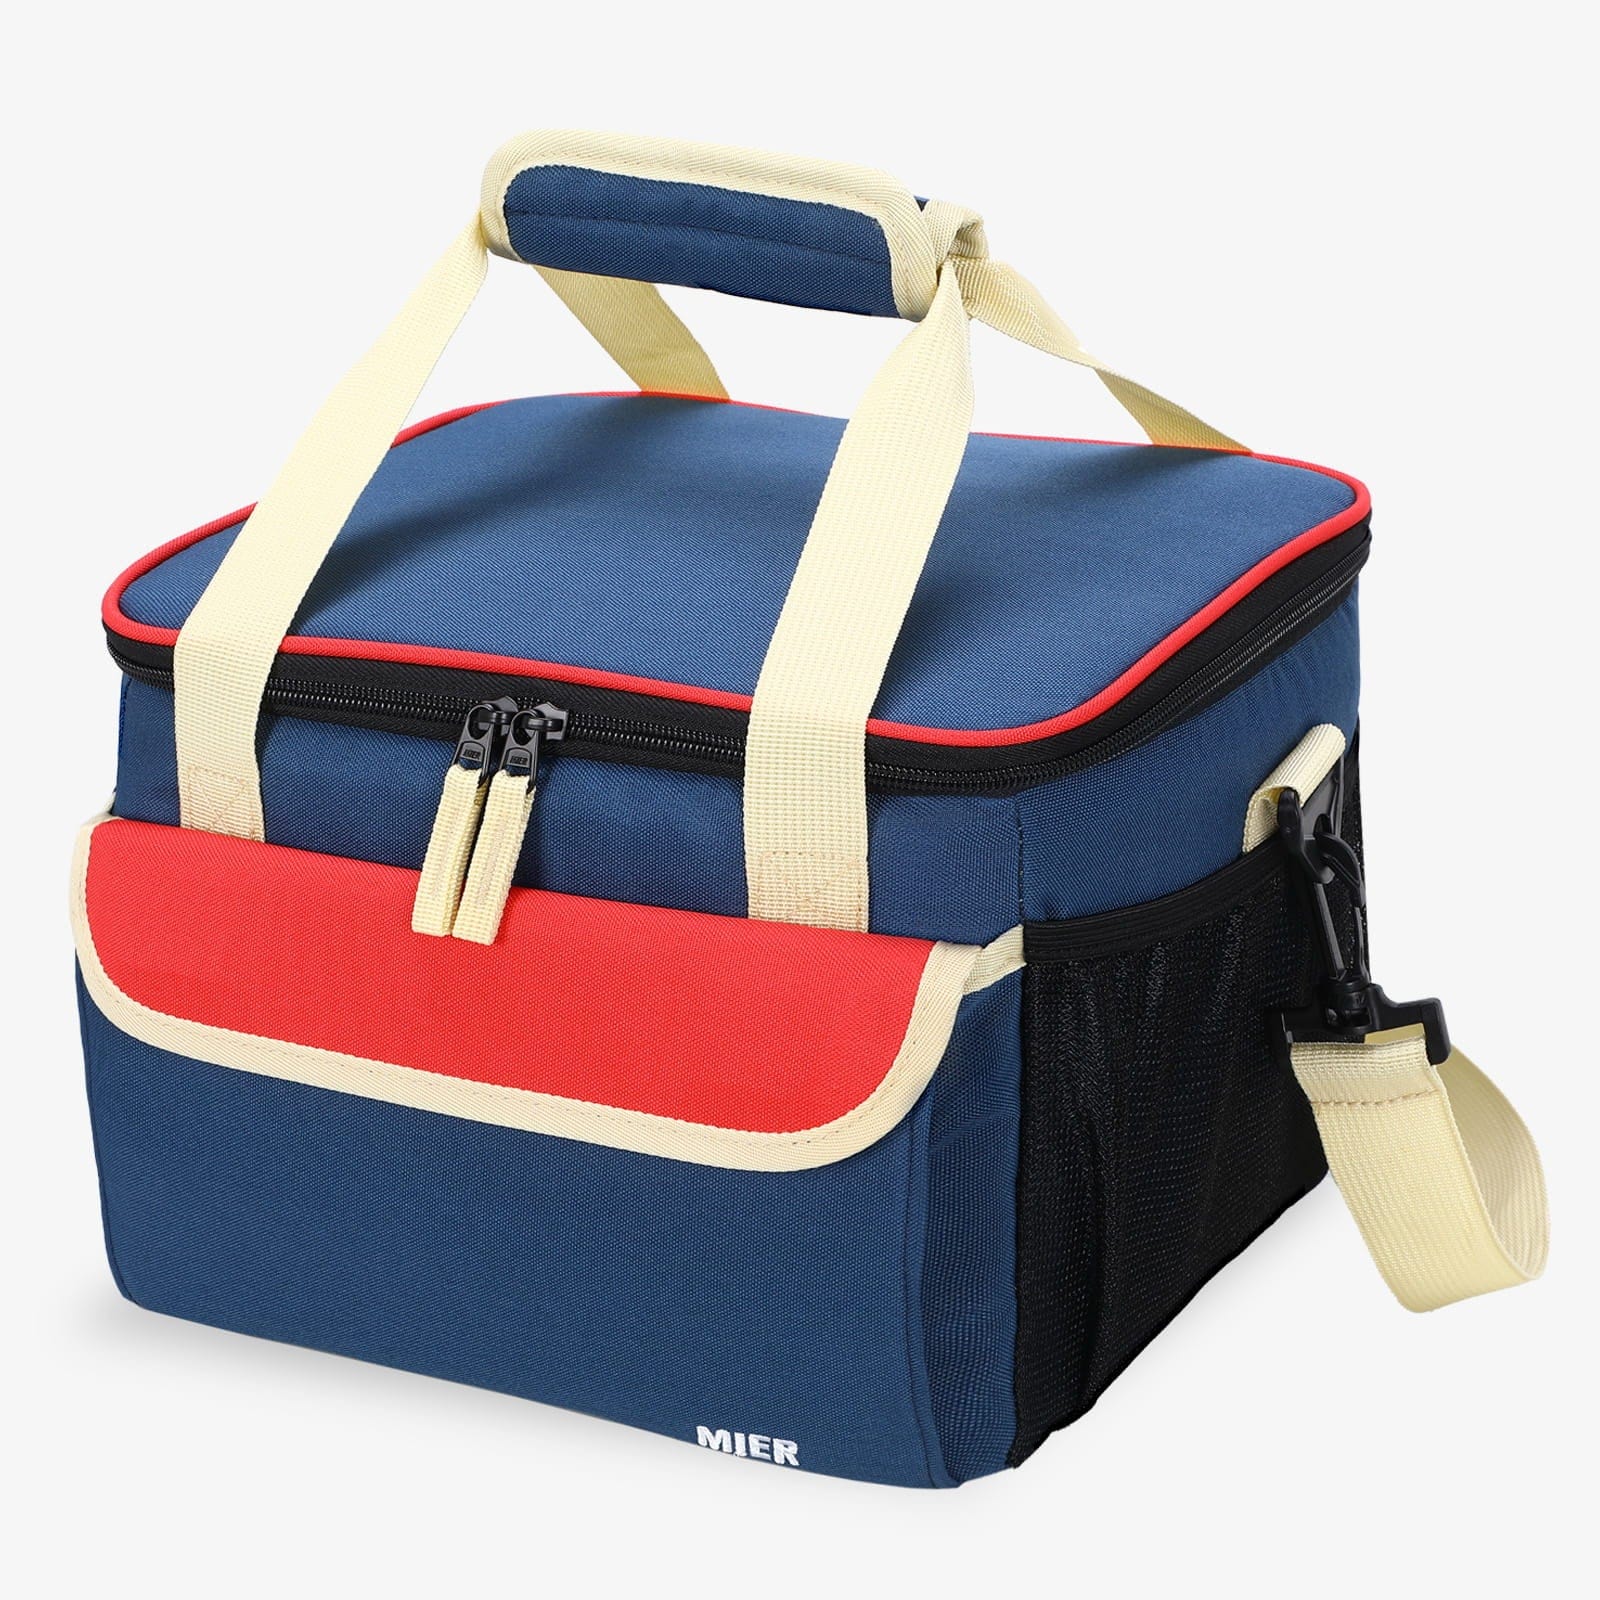 Large Lunch Box for Men Insulated Lunch Bags Adult Lunch Bag Blue Red MIER